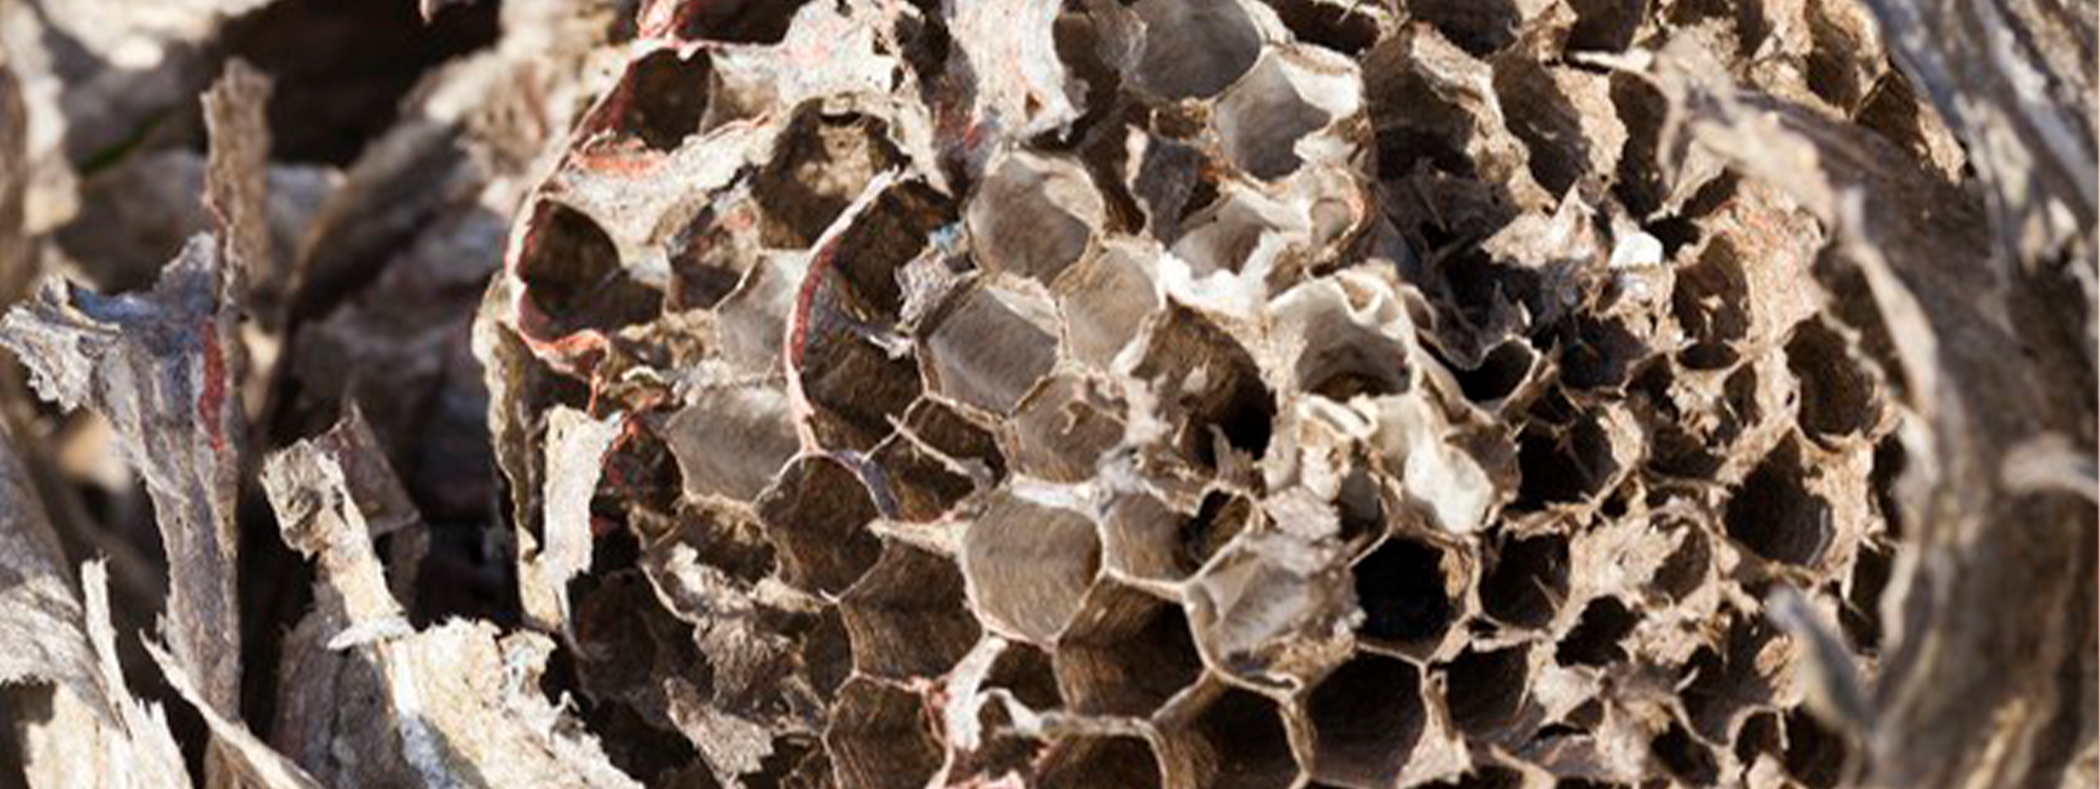 How Do Wasps Make Their Nests